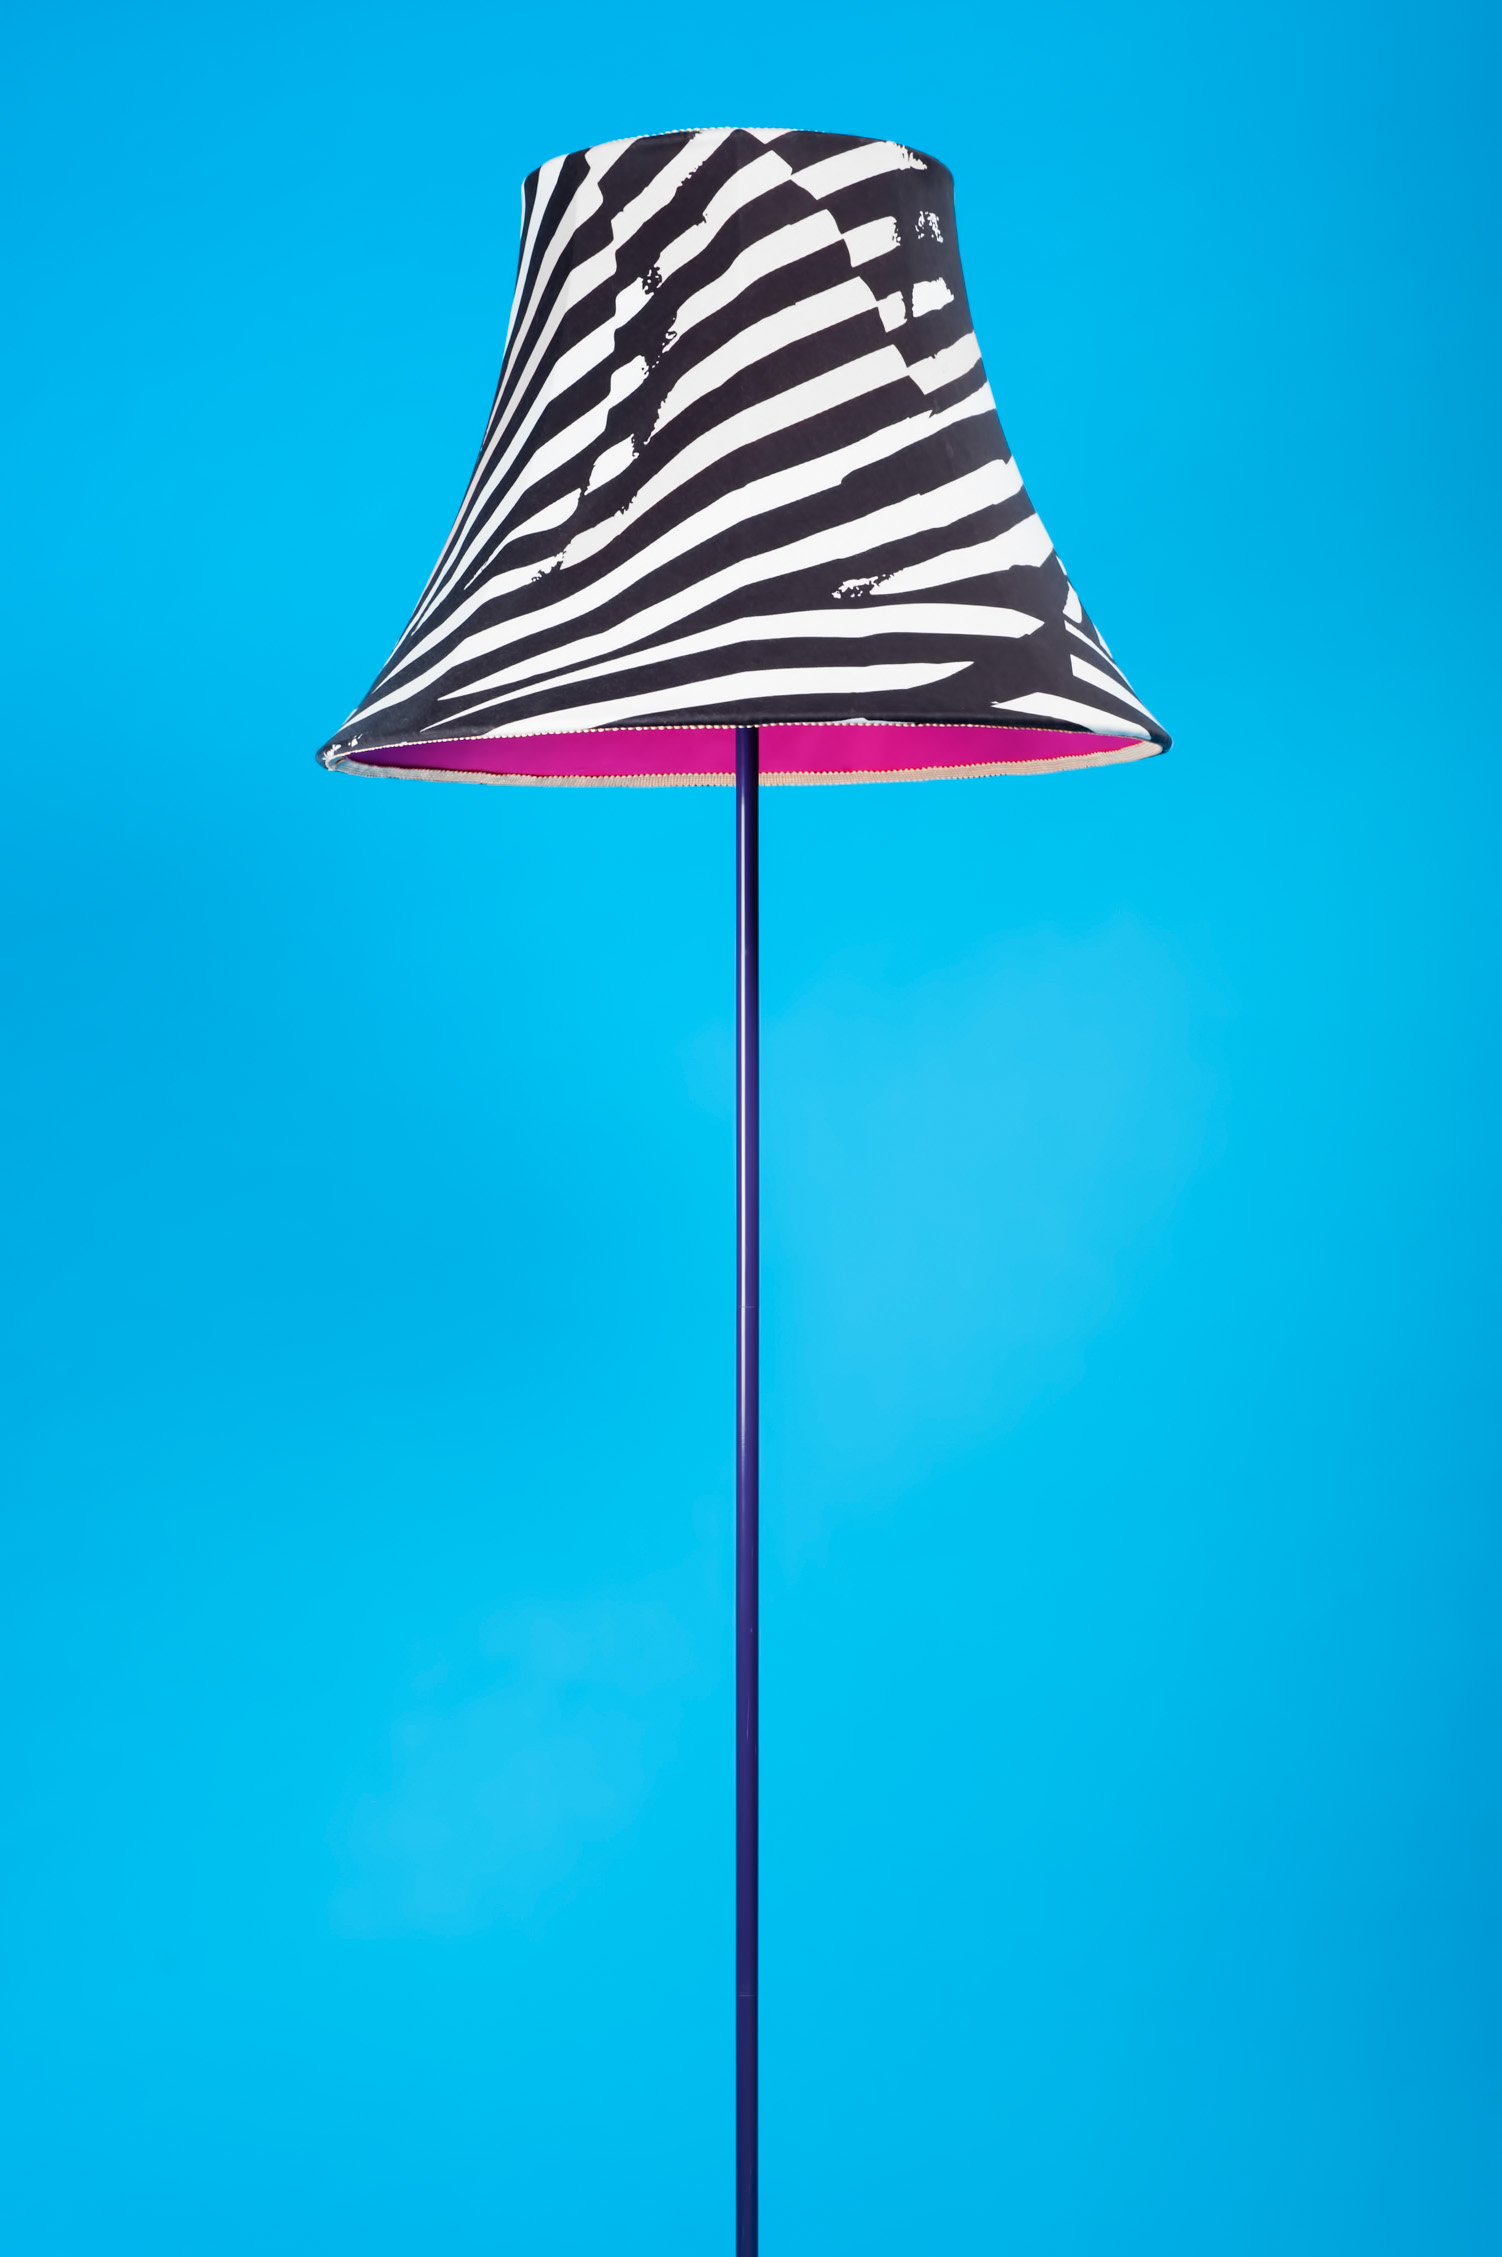 Lampshade by Hastings product photographer James Robertshaw